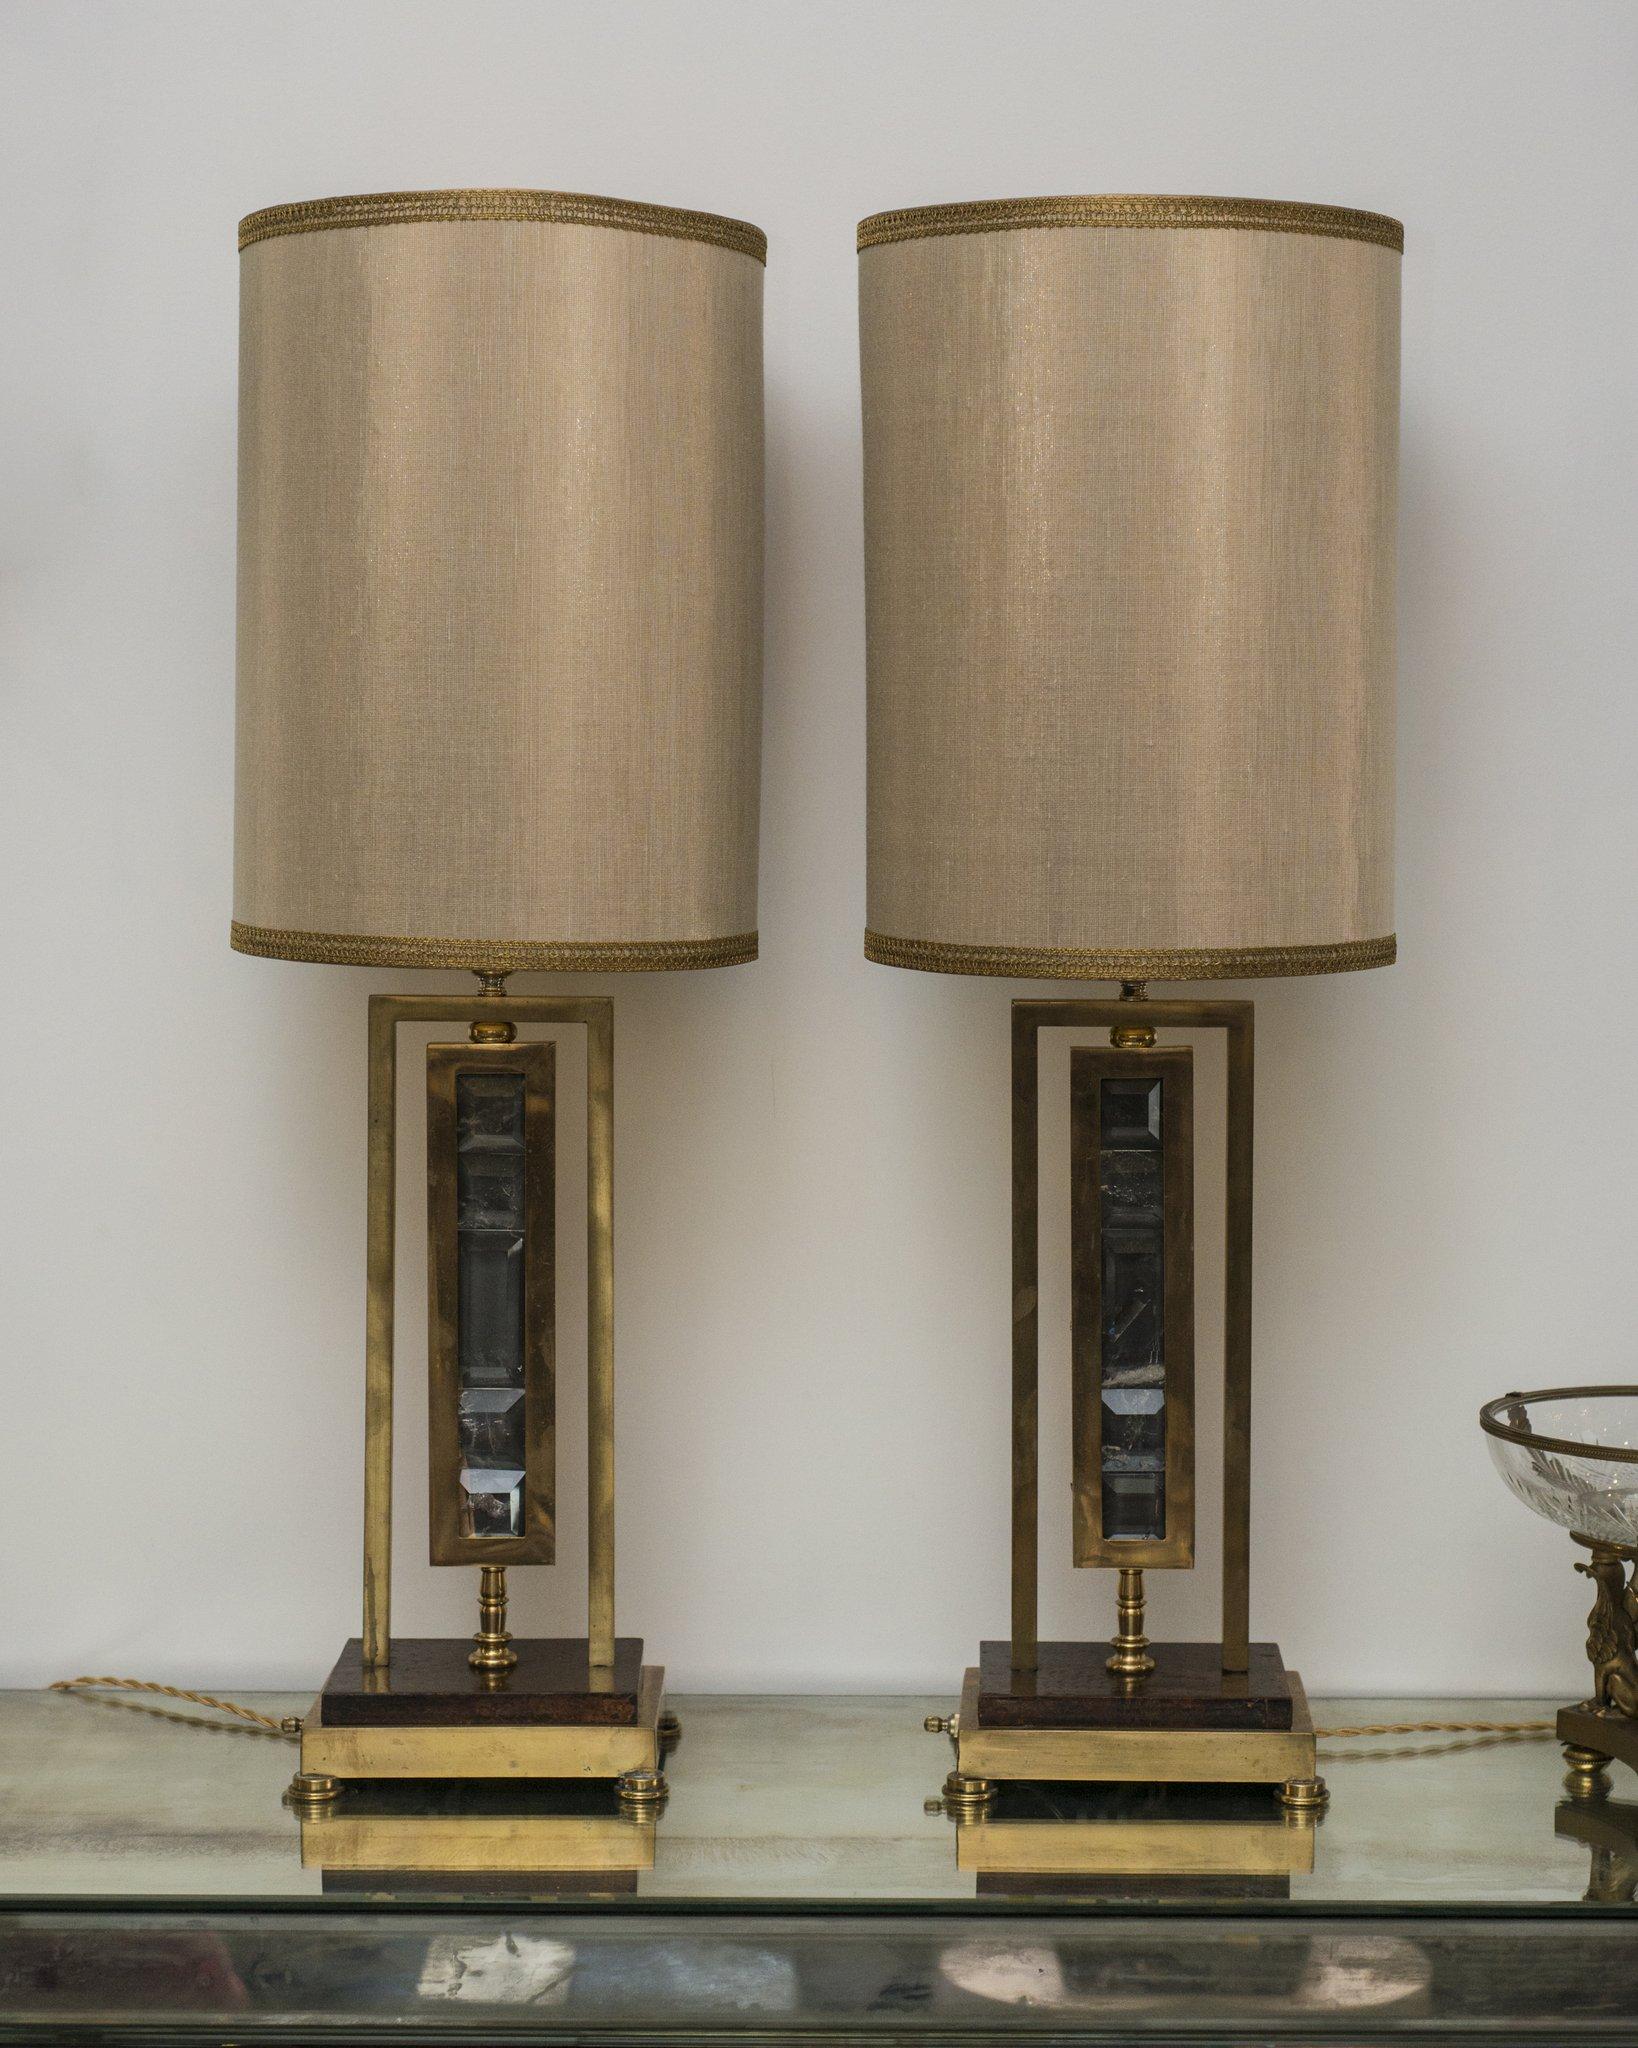 This pair of stunning museum quality midcentury French bronze lamps made with smoky quartz have been sourced in Paris. The custom shades are handmade using gold metallic silk, with gold leaf interiors, and are completed with vintage metallic trim.